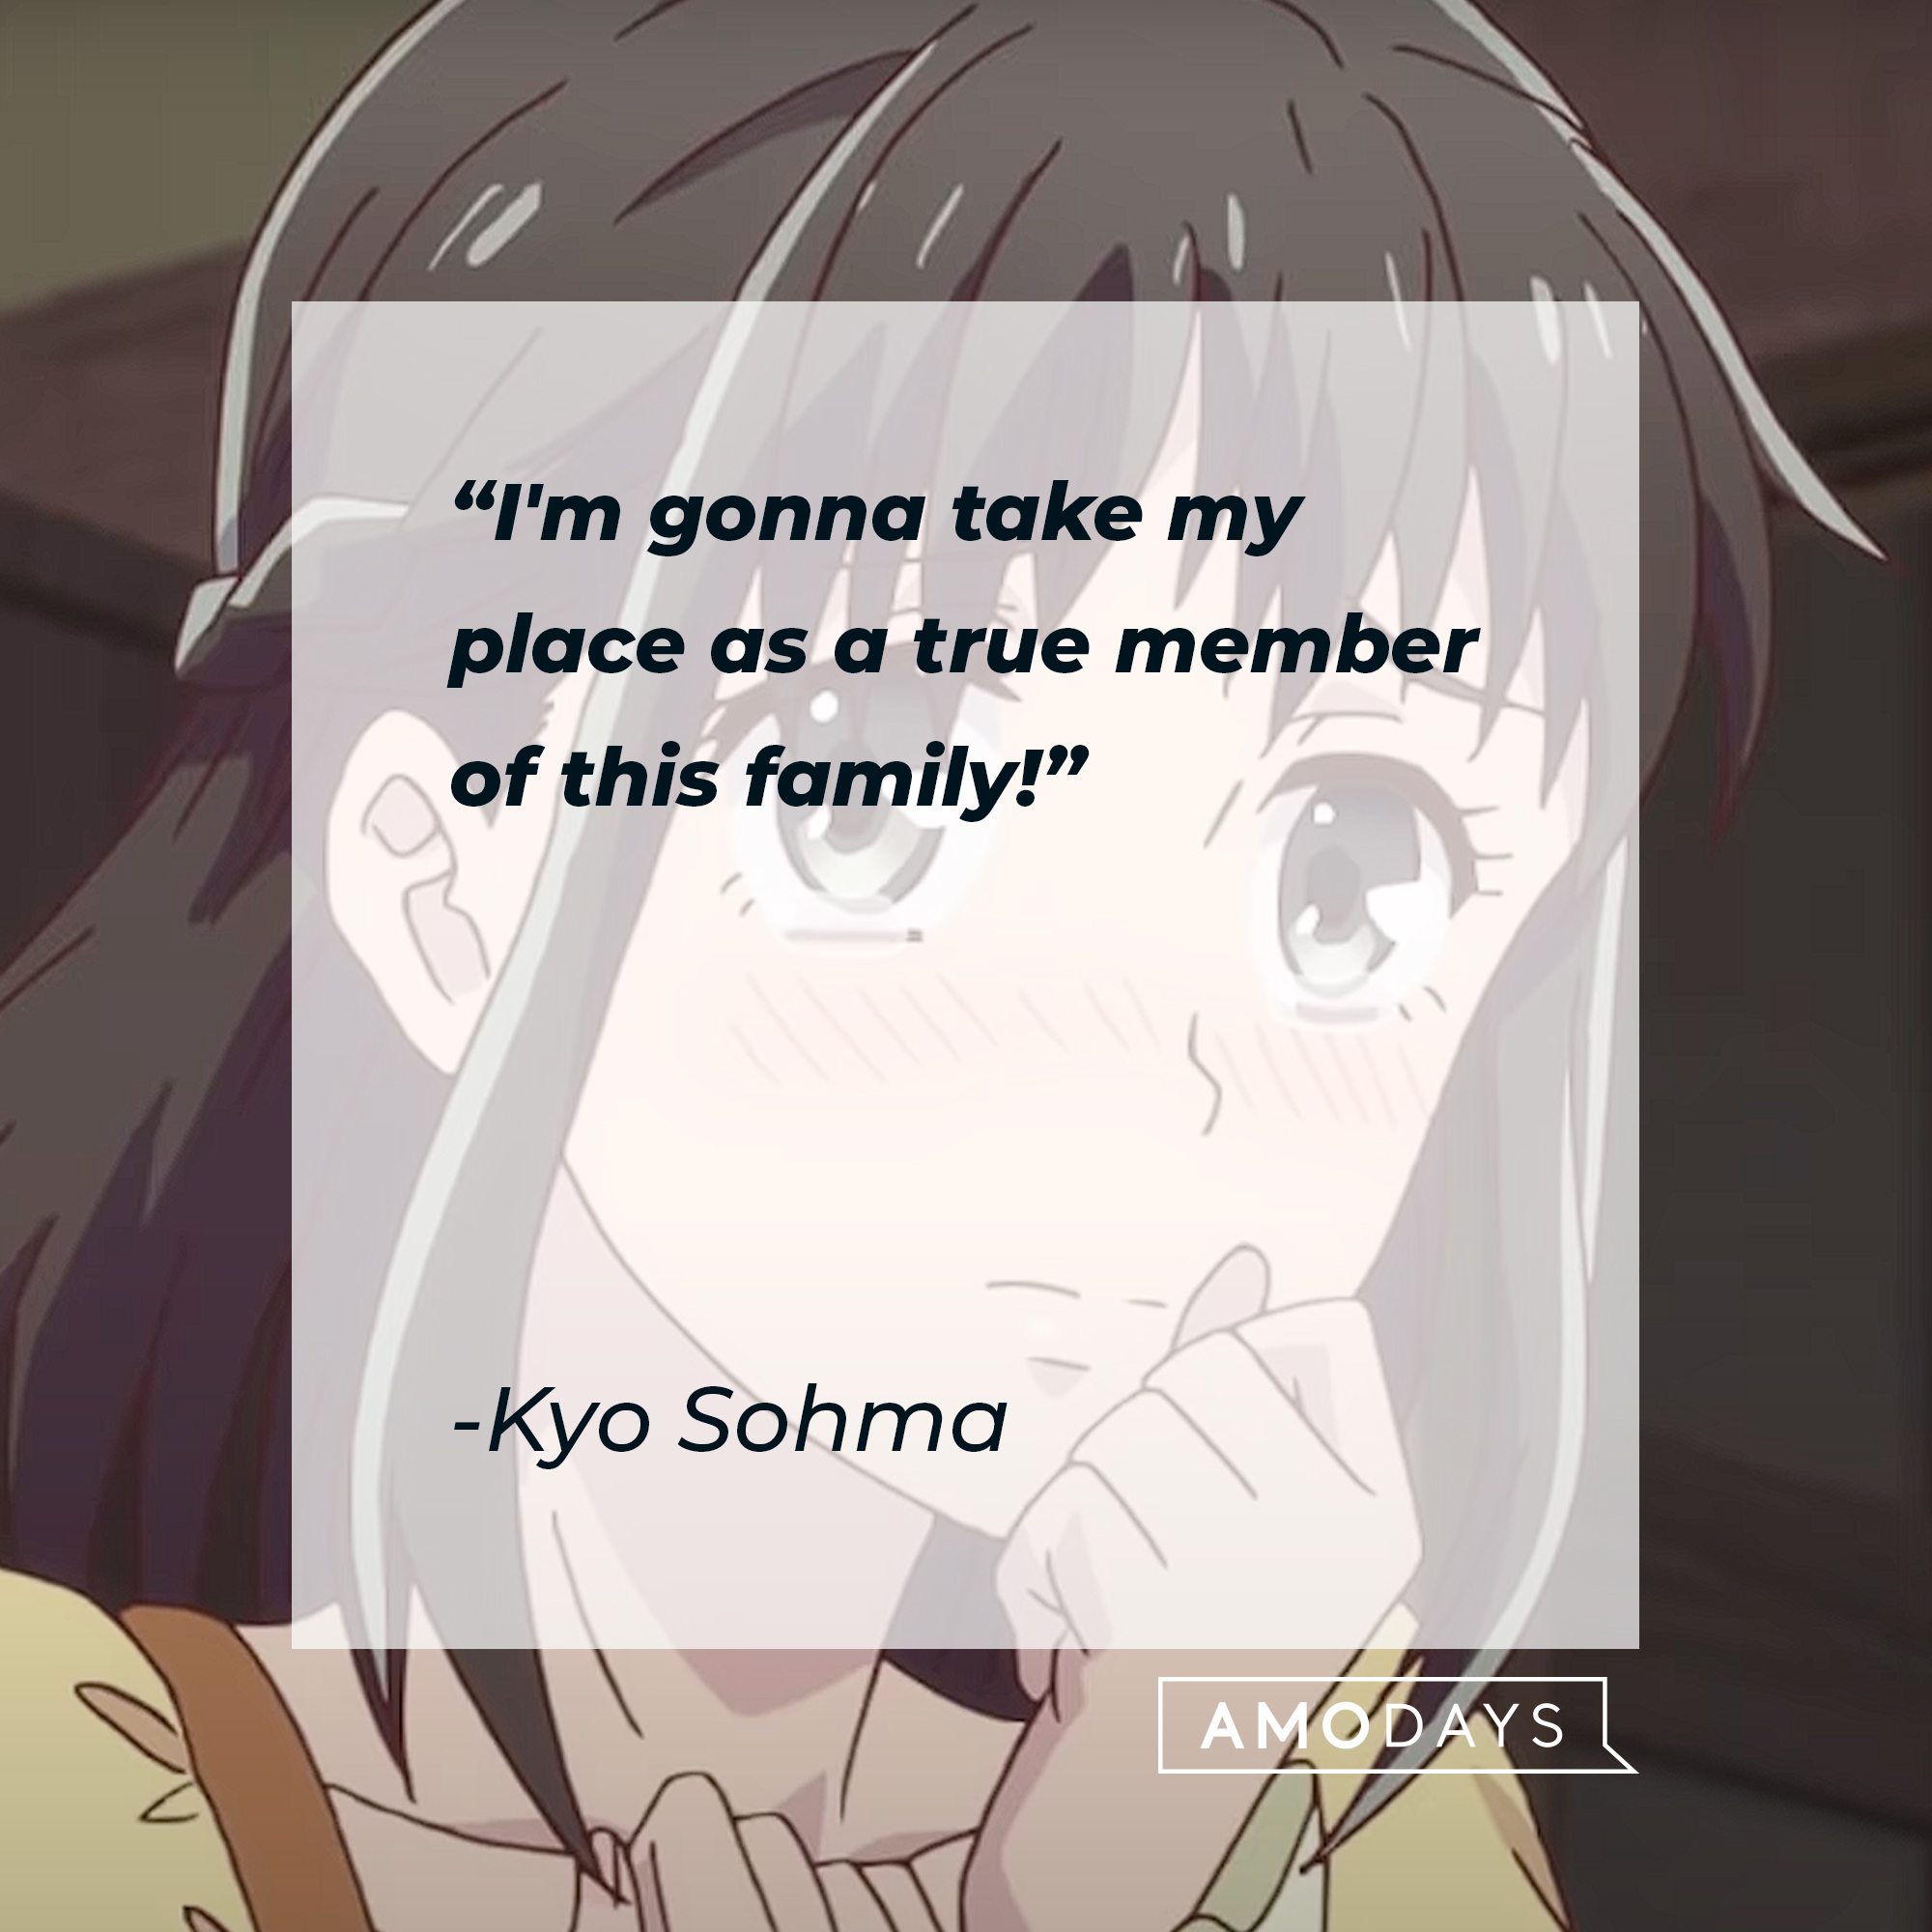 Kyo Sohma's quote: "I'm gonna take my place as a true member of this family!" | Image: youtube.com/Crunchyroll Collection